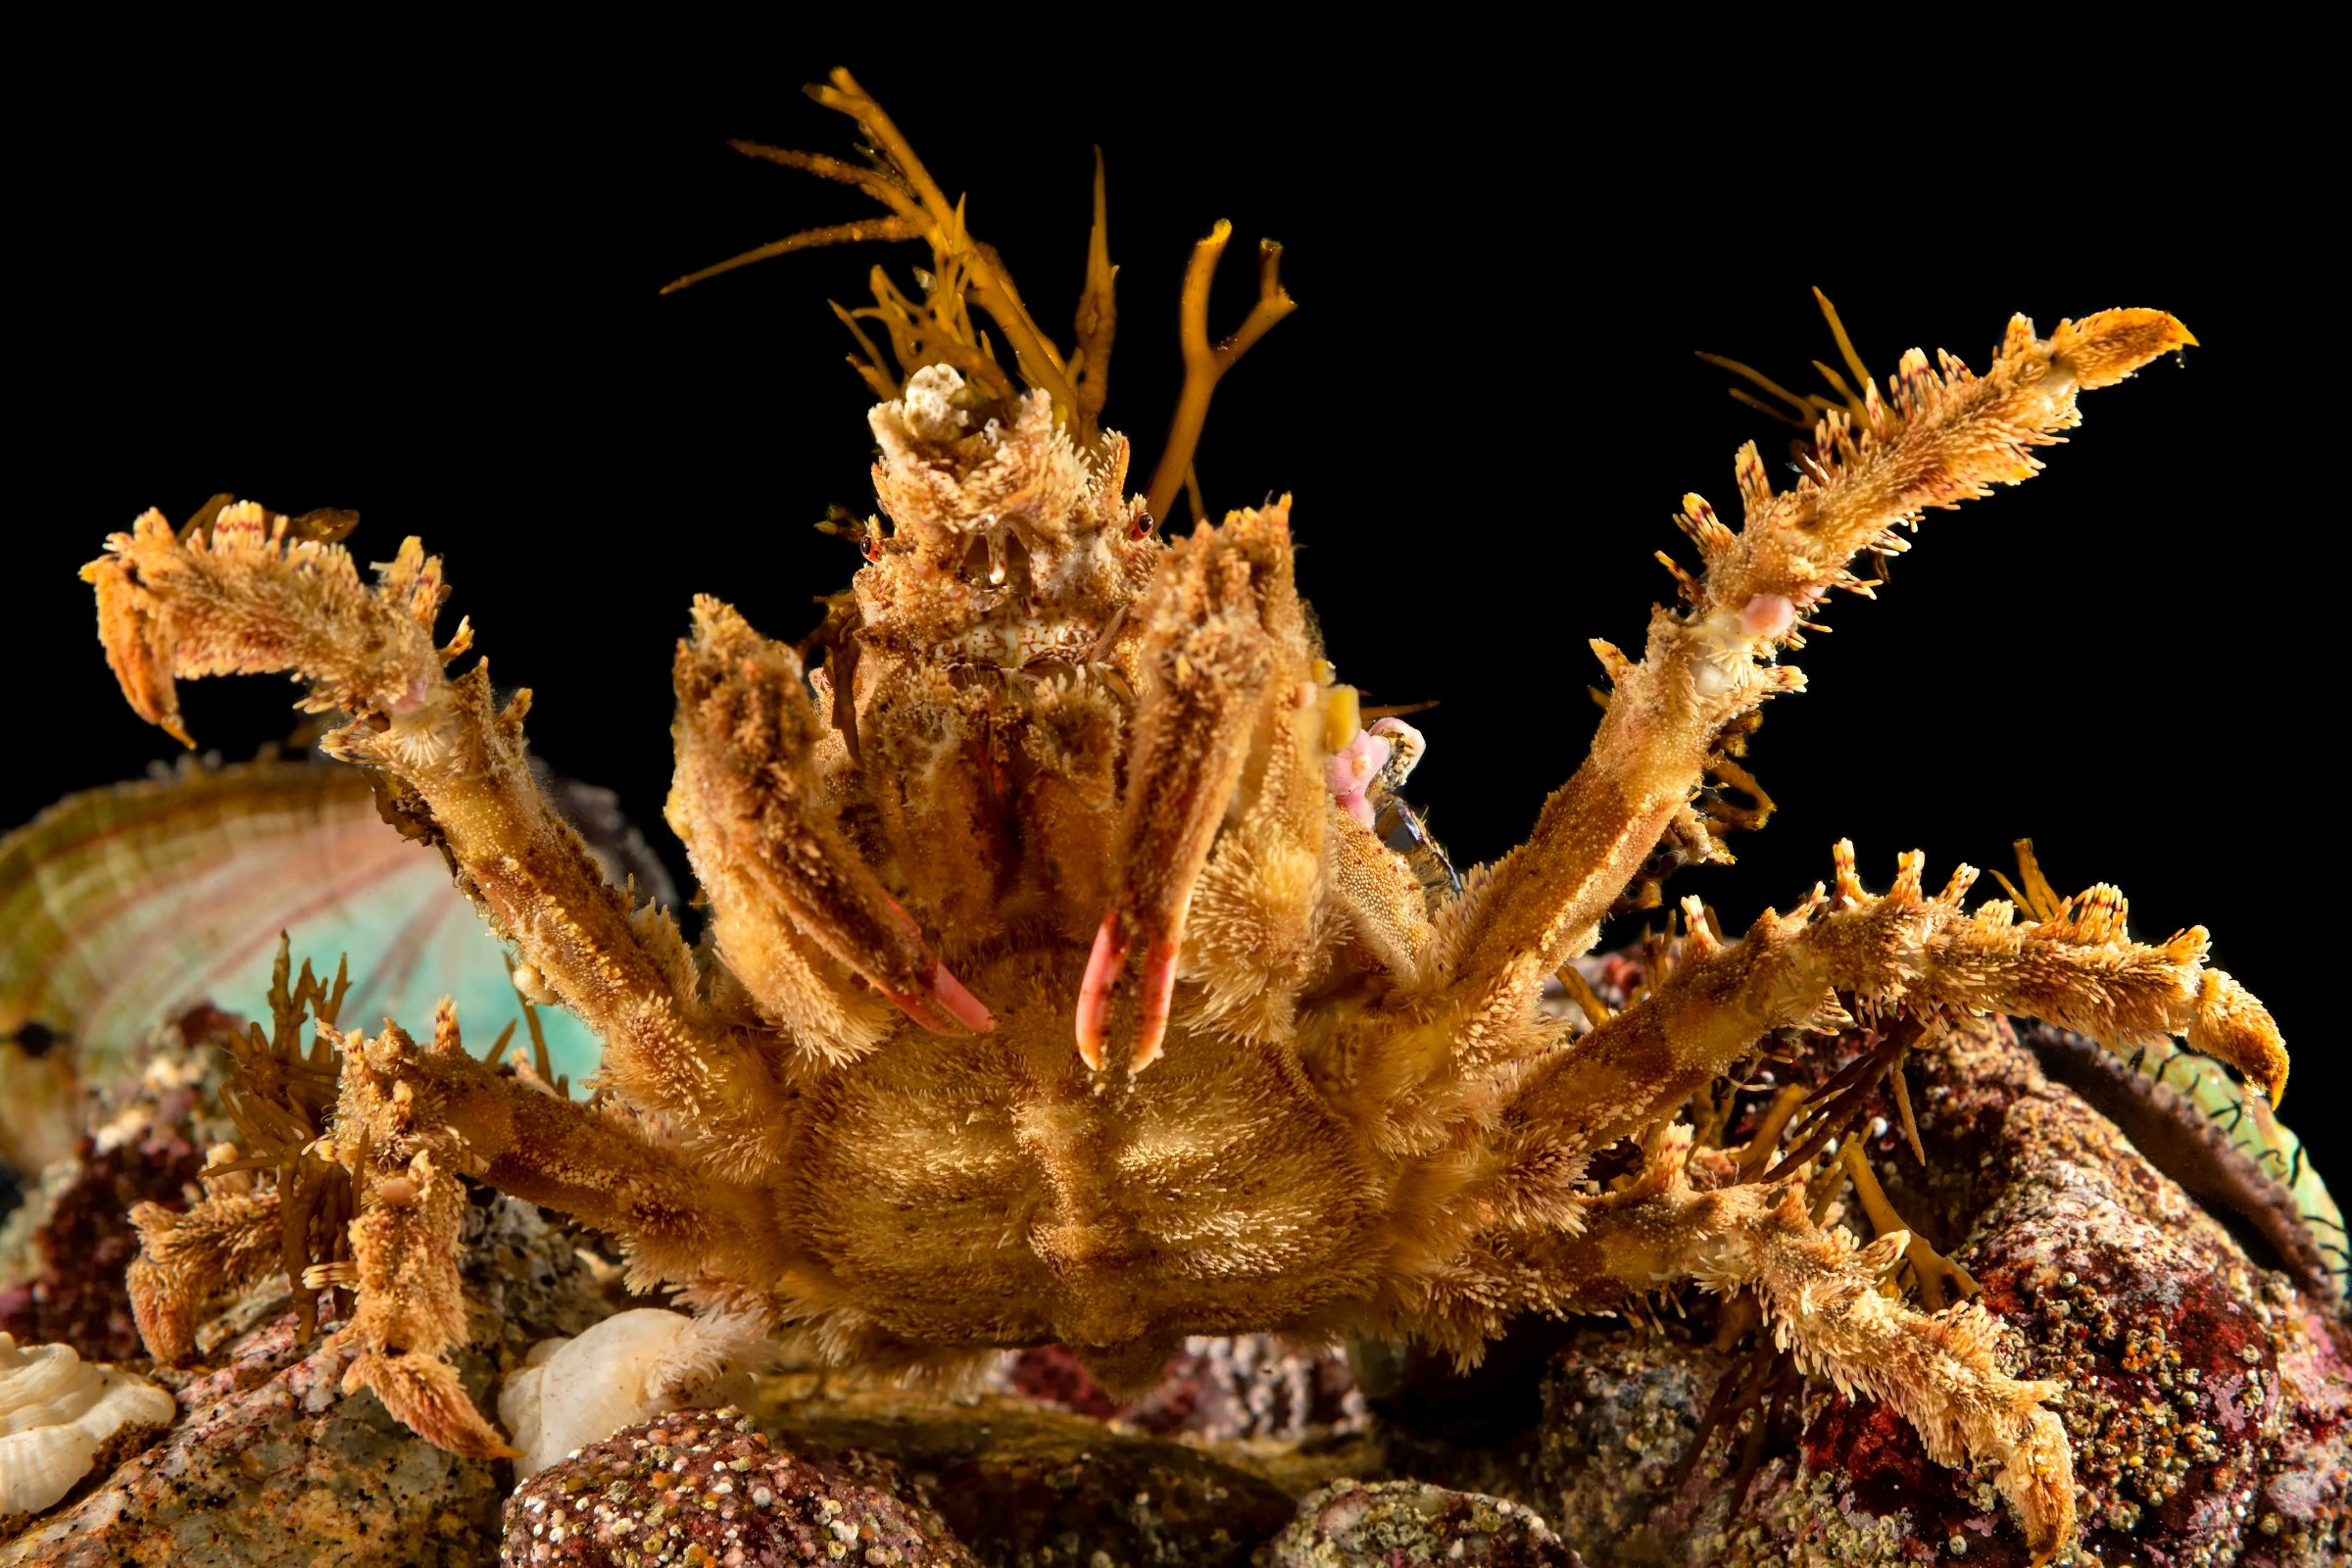 Spider Decorator Crab- Facts and Photographs | Seaunseen